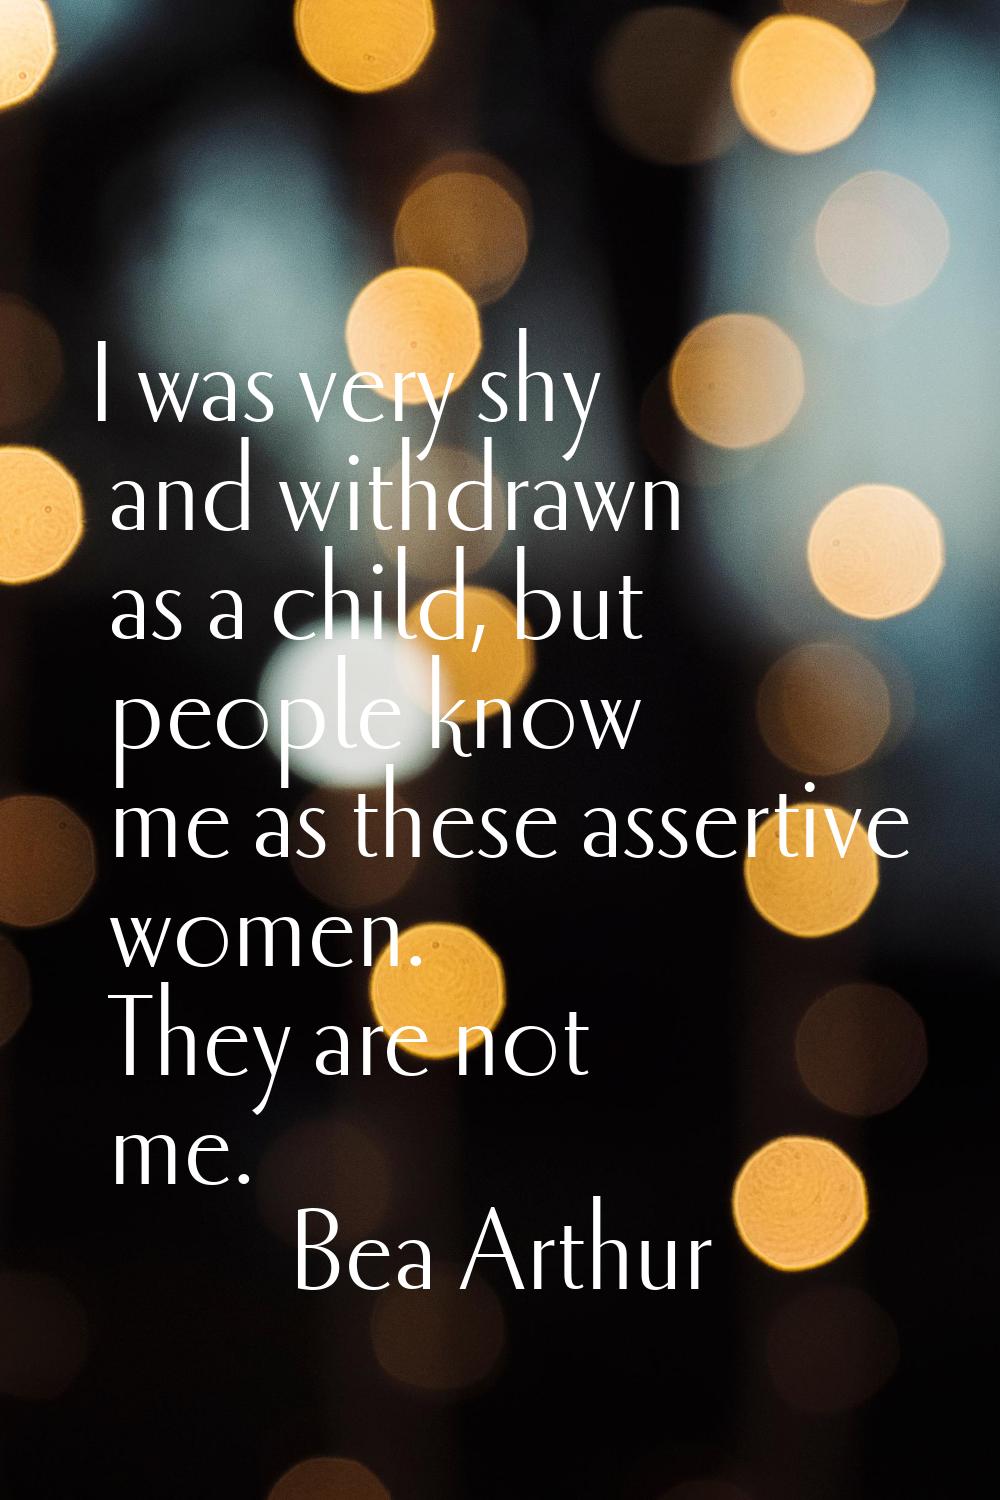 I was very shy and withdrawn as a child, but people know me as these assertive women. They are not 